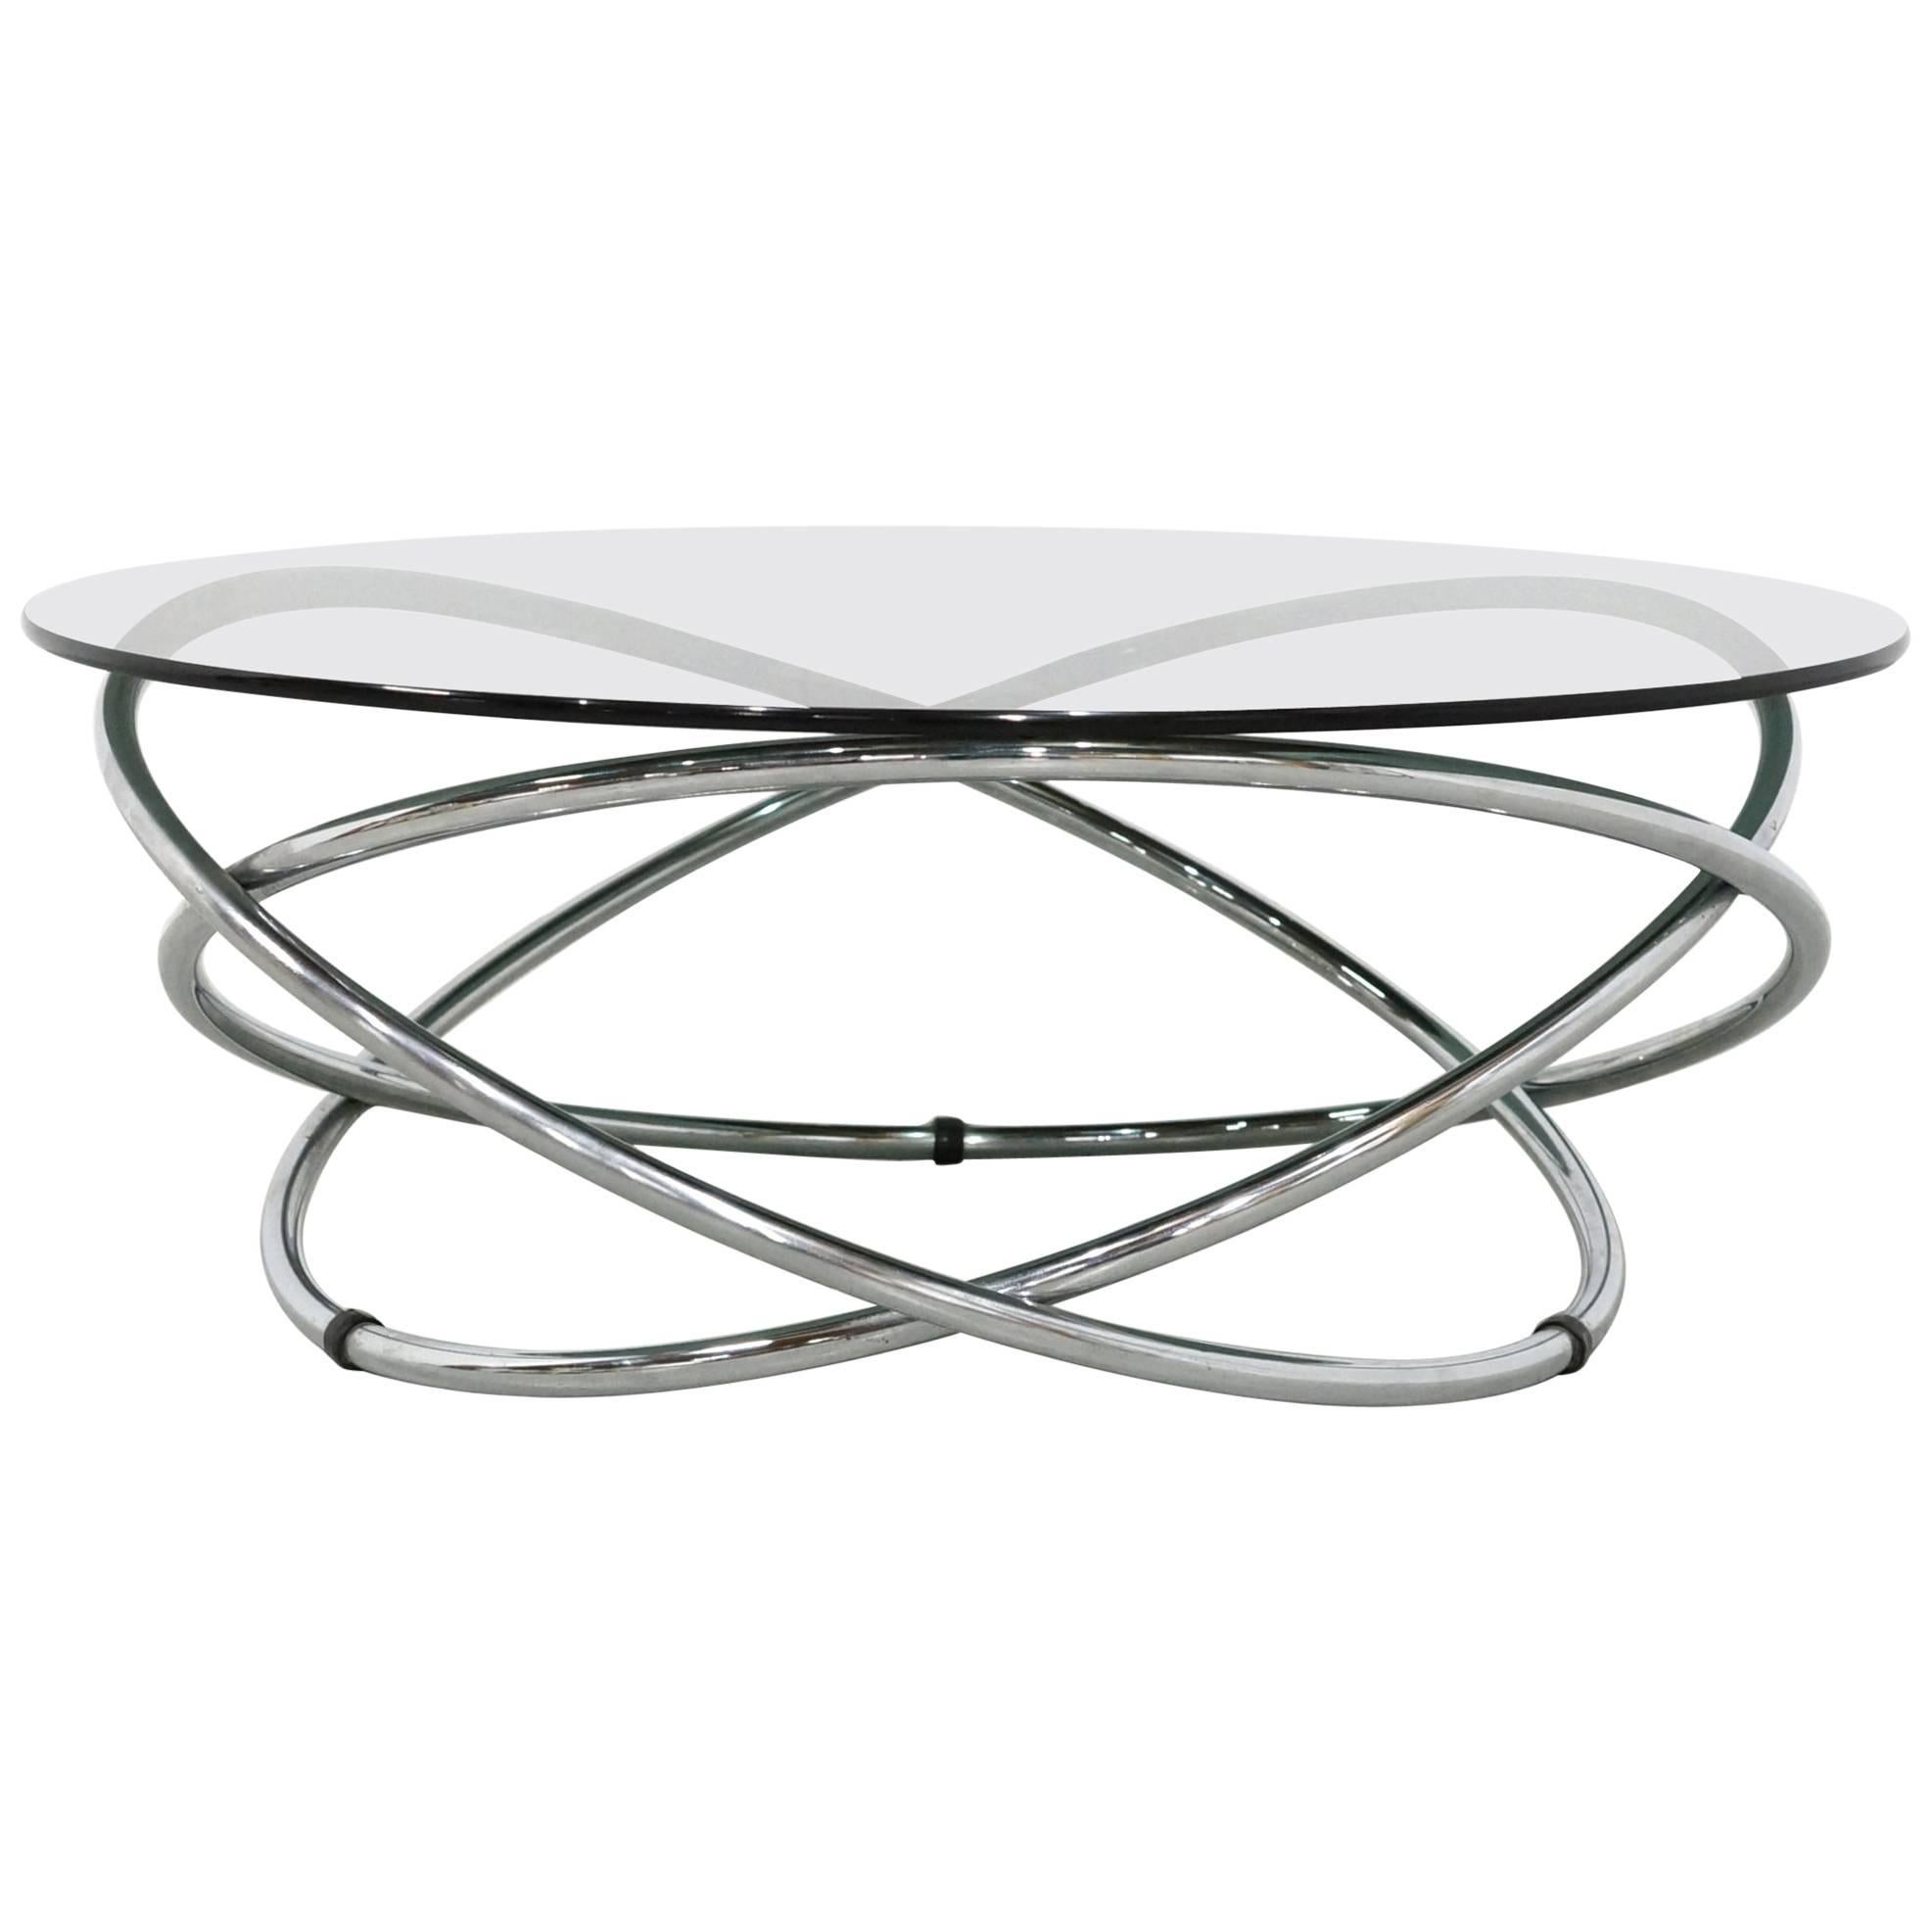 Italian Chrome Rings Coffee Table with Smoked Glass Top, 1960s For Sale